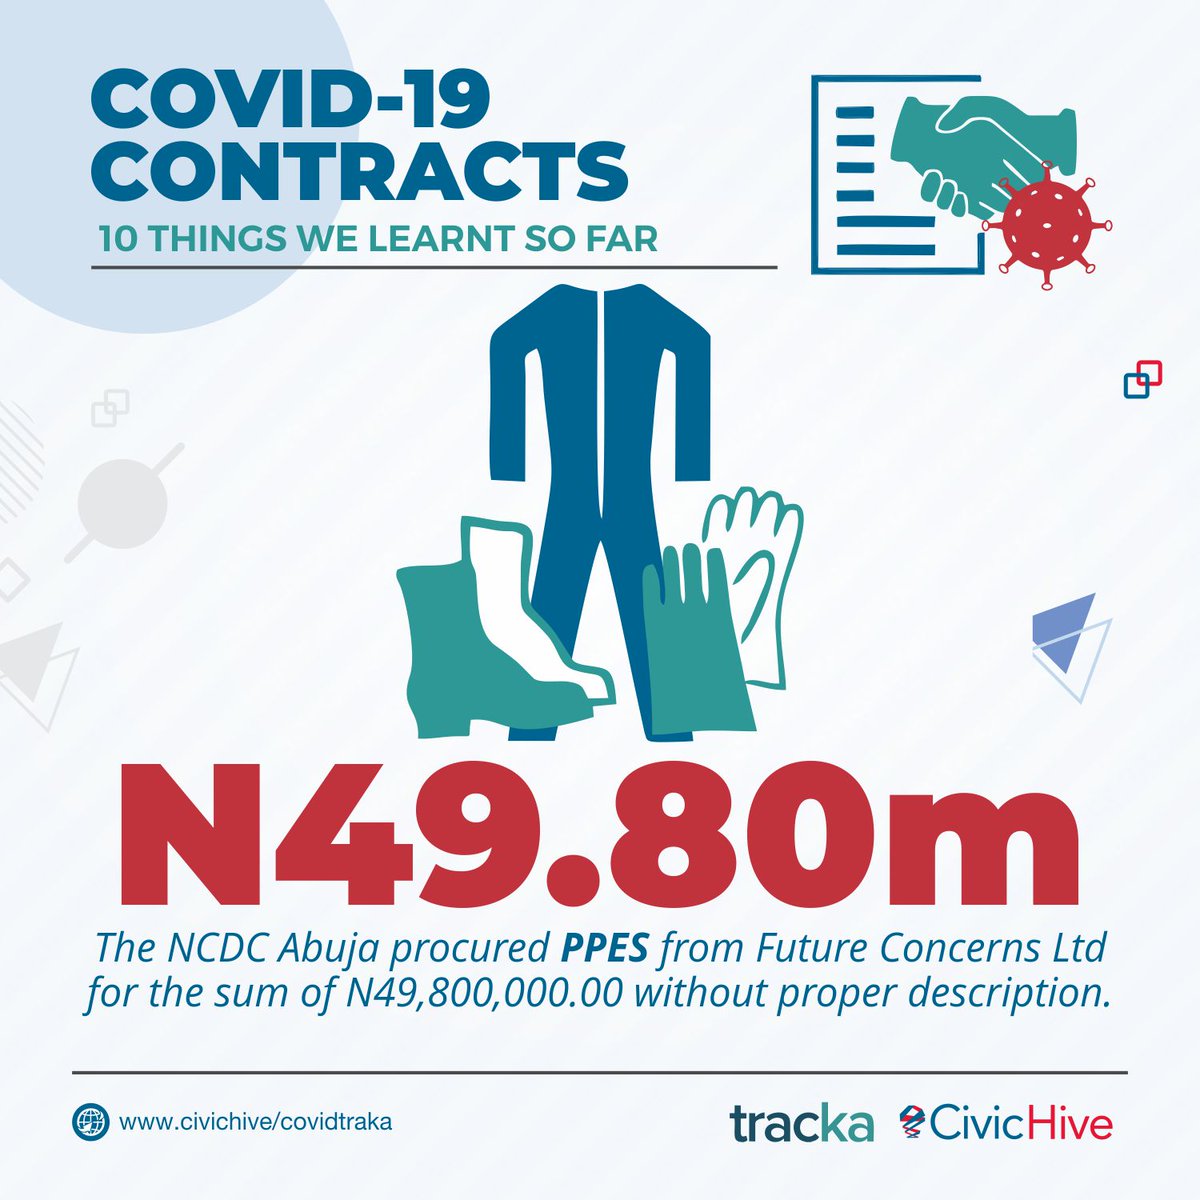 . @NCDCgov Abuja spent N49.8m on PEPs without proper descriptions of things bought with the funds. We do not have a proper record of how much was spent on what. This appears to secretive.  #CovidFunds  #AskQuestions